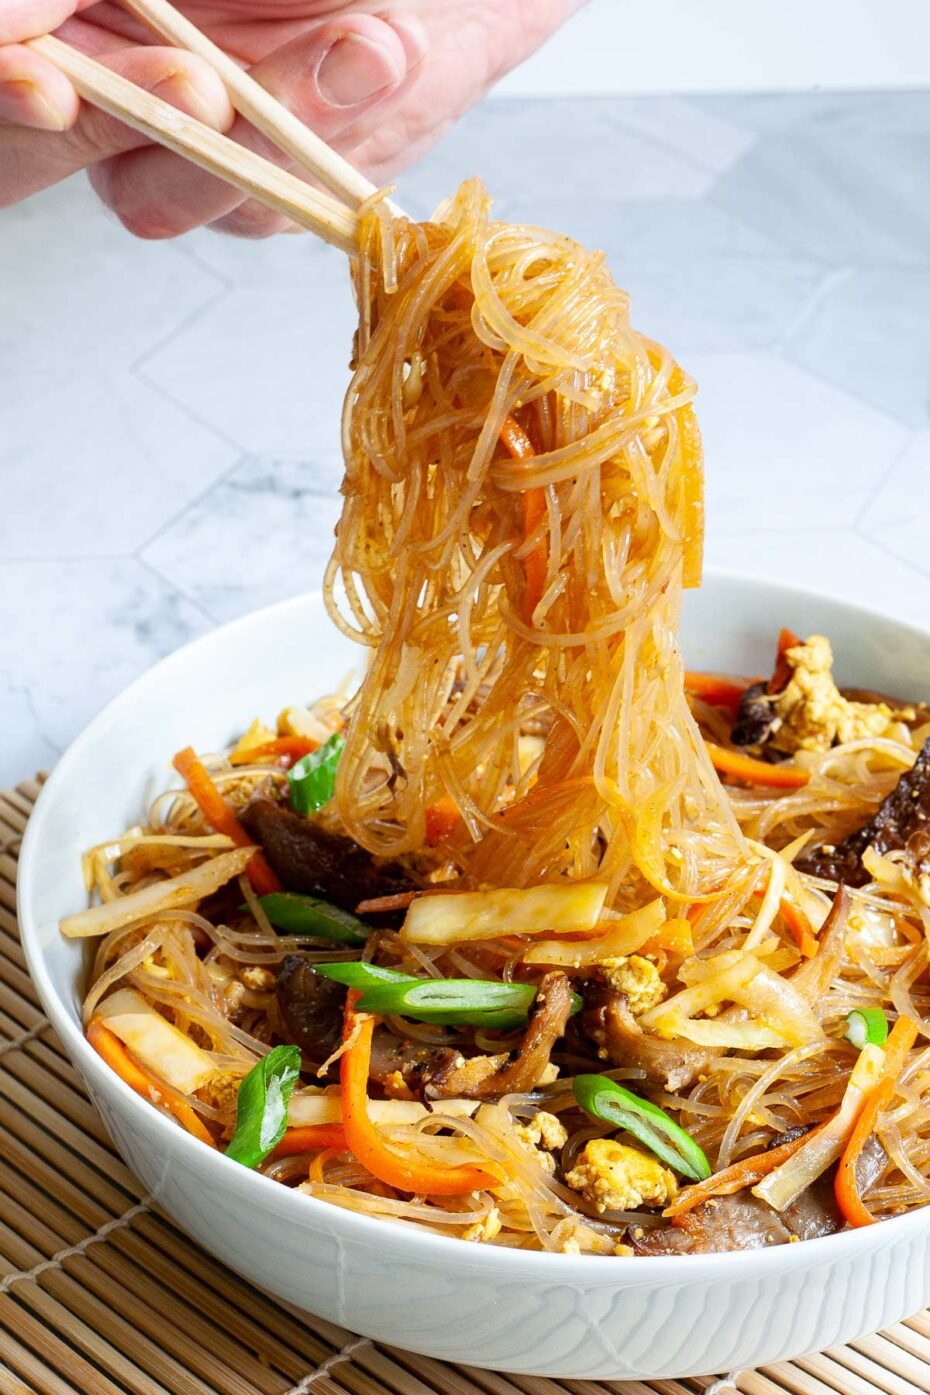 A white plate from above is full of glass noodles, shredded carrots, cabbage, sliced green onion, bean sprouts, mushroom shreds. A hand is holding chopsticks and lifting a generous amount of noodles up in the air.